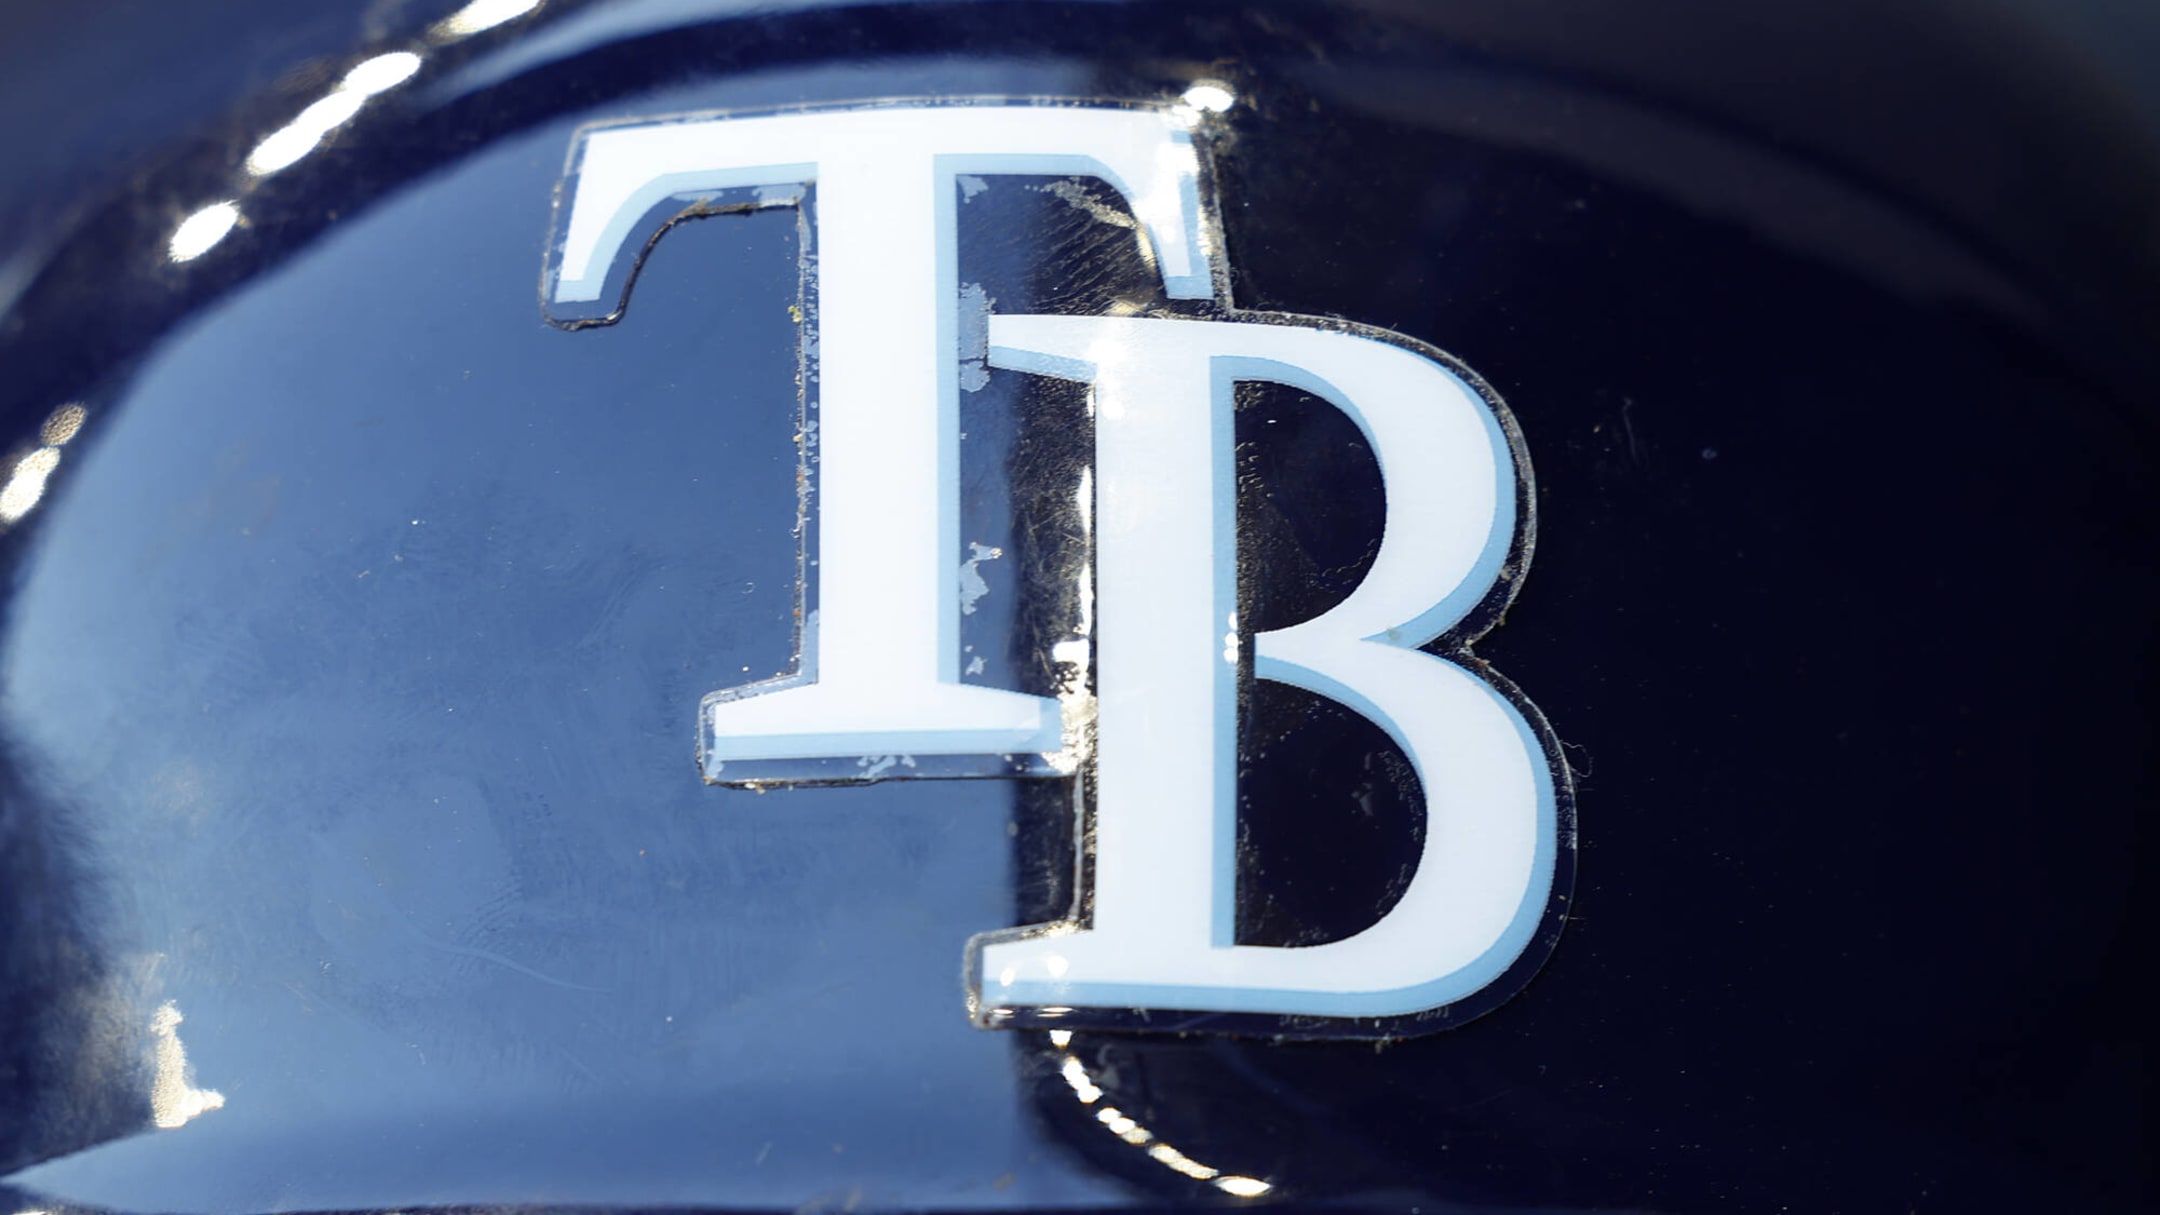 Tampa Bay Rays Attracting Potential Buyers That Could Keep Team